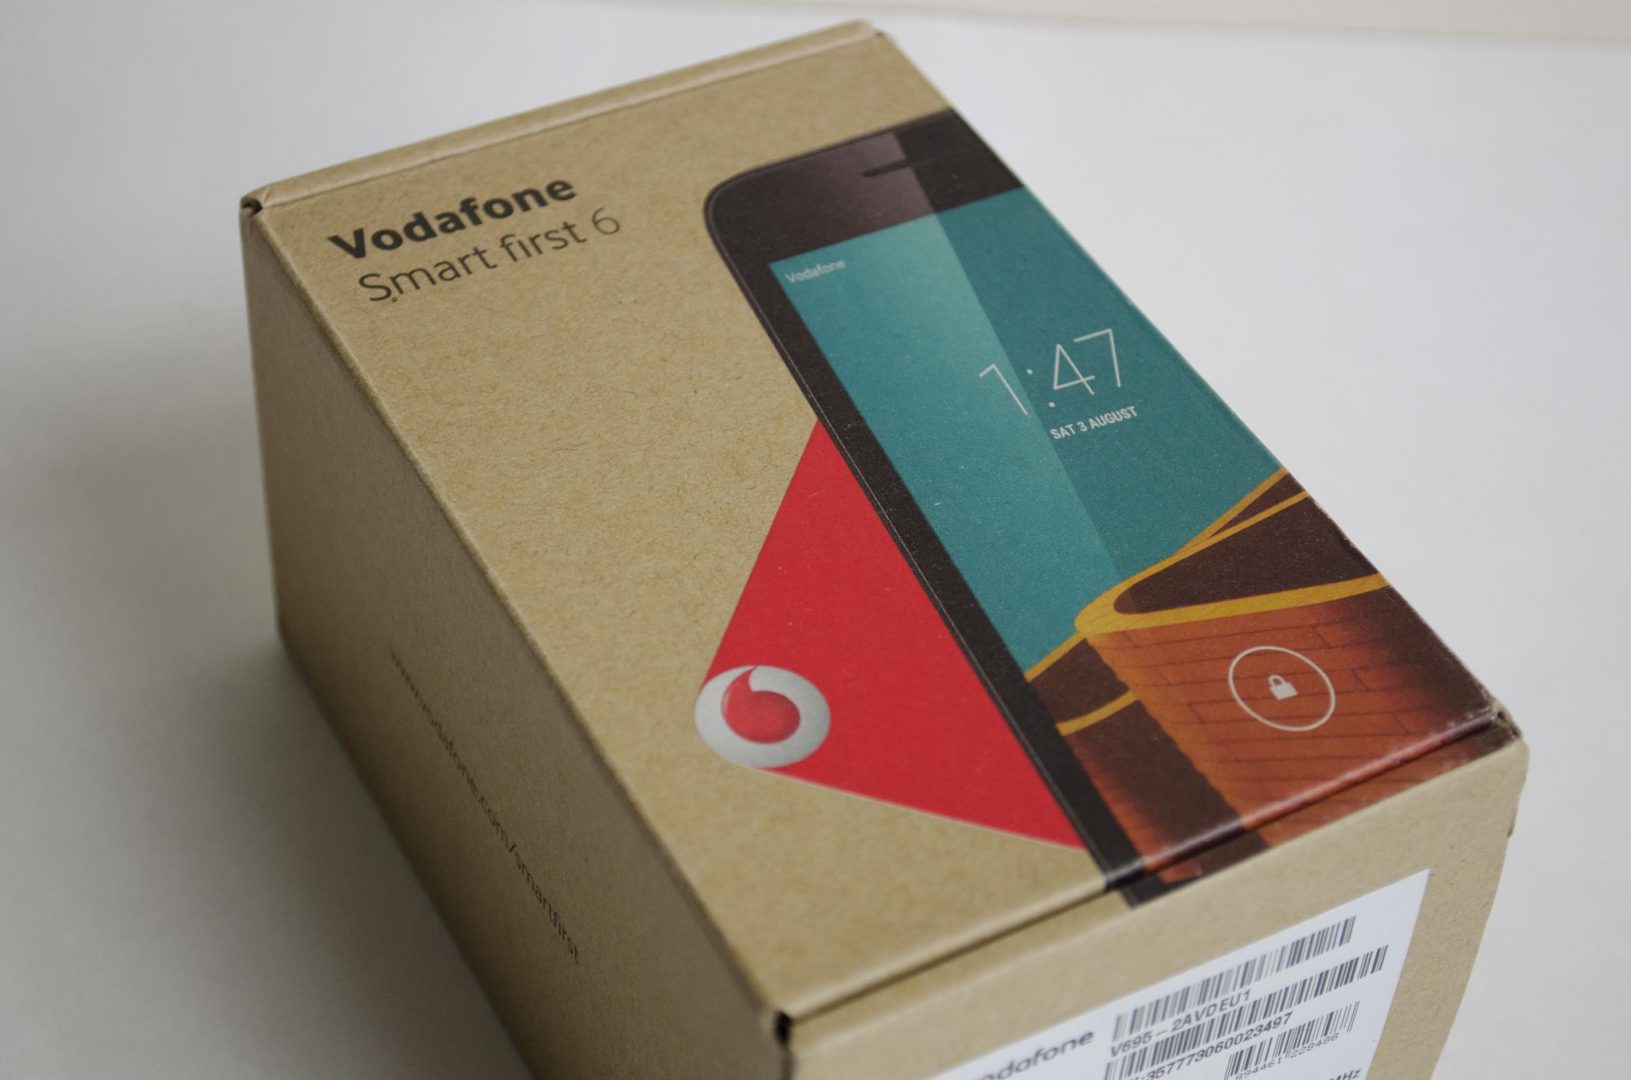 Vodaphone Smart First 6 Mobile Phone Review